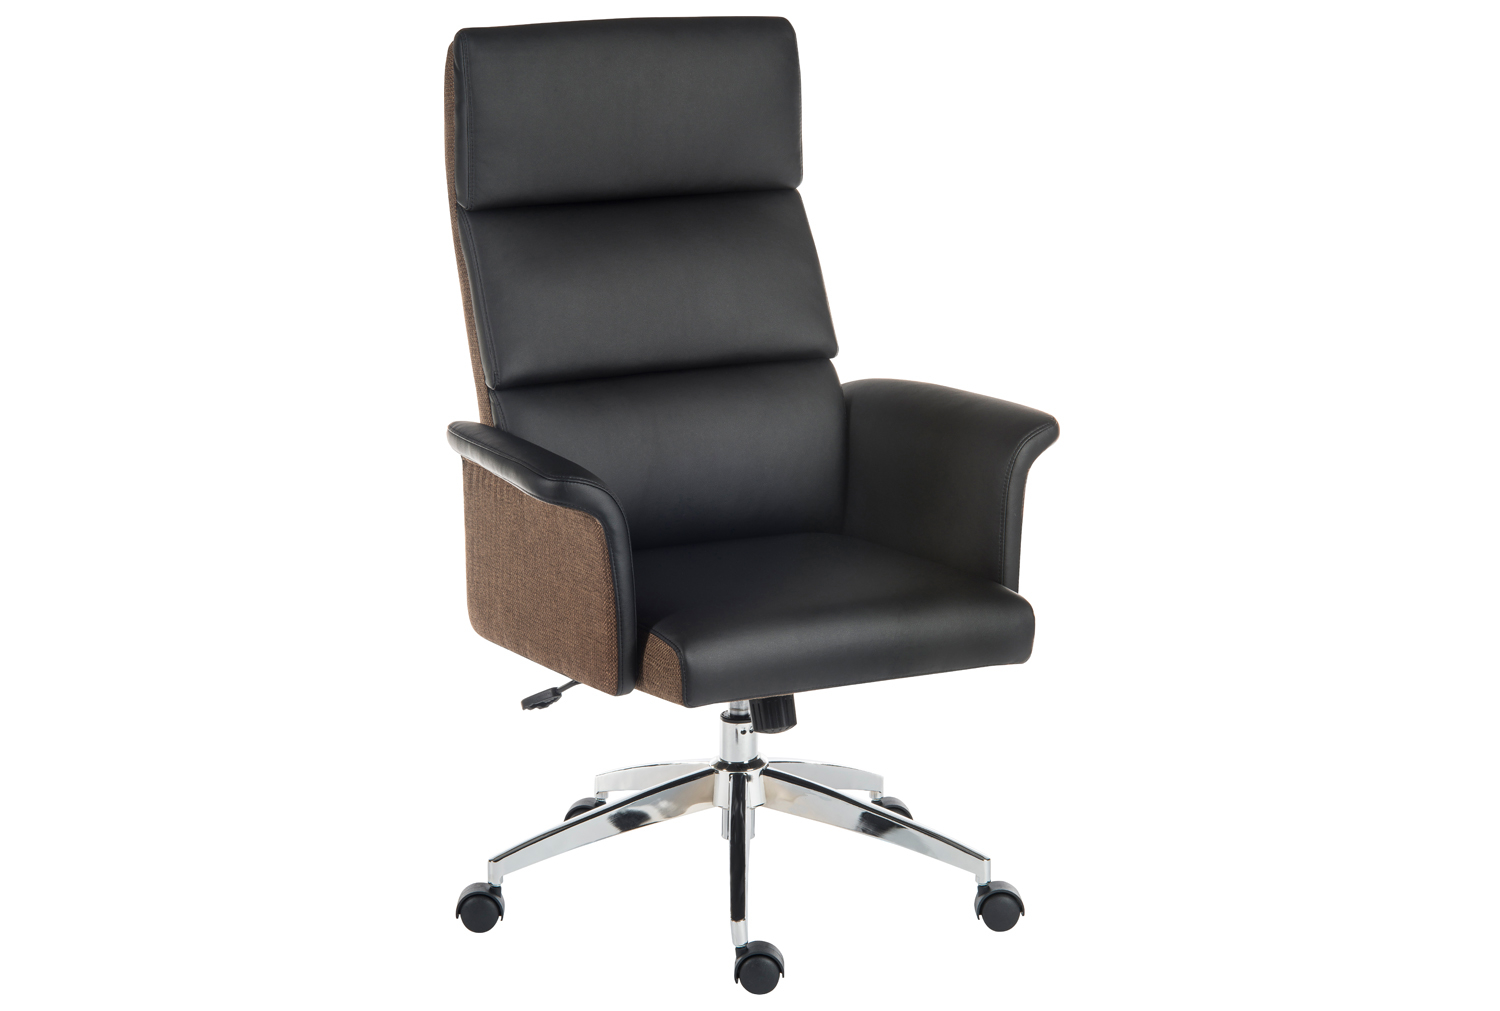 Panache High Back Executive Leather Look Office Chair Black, Fully Installed